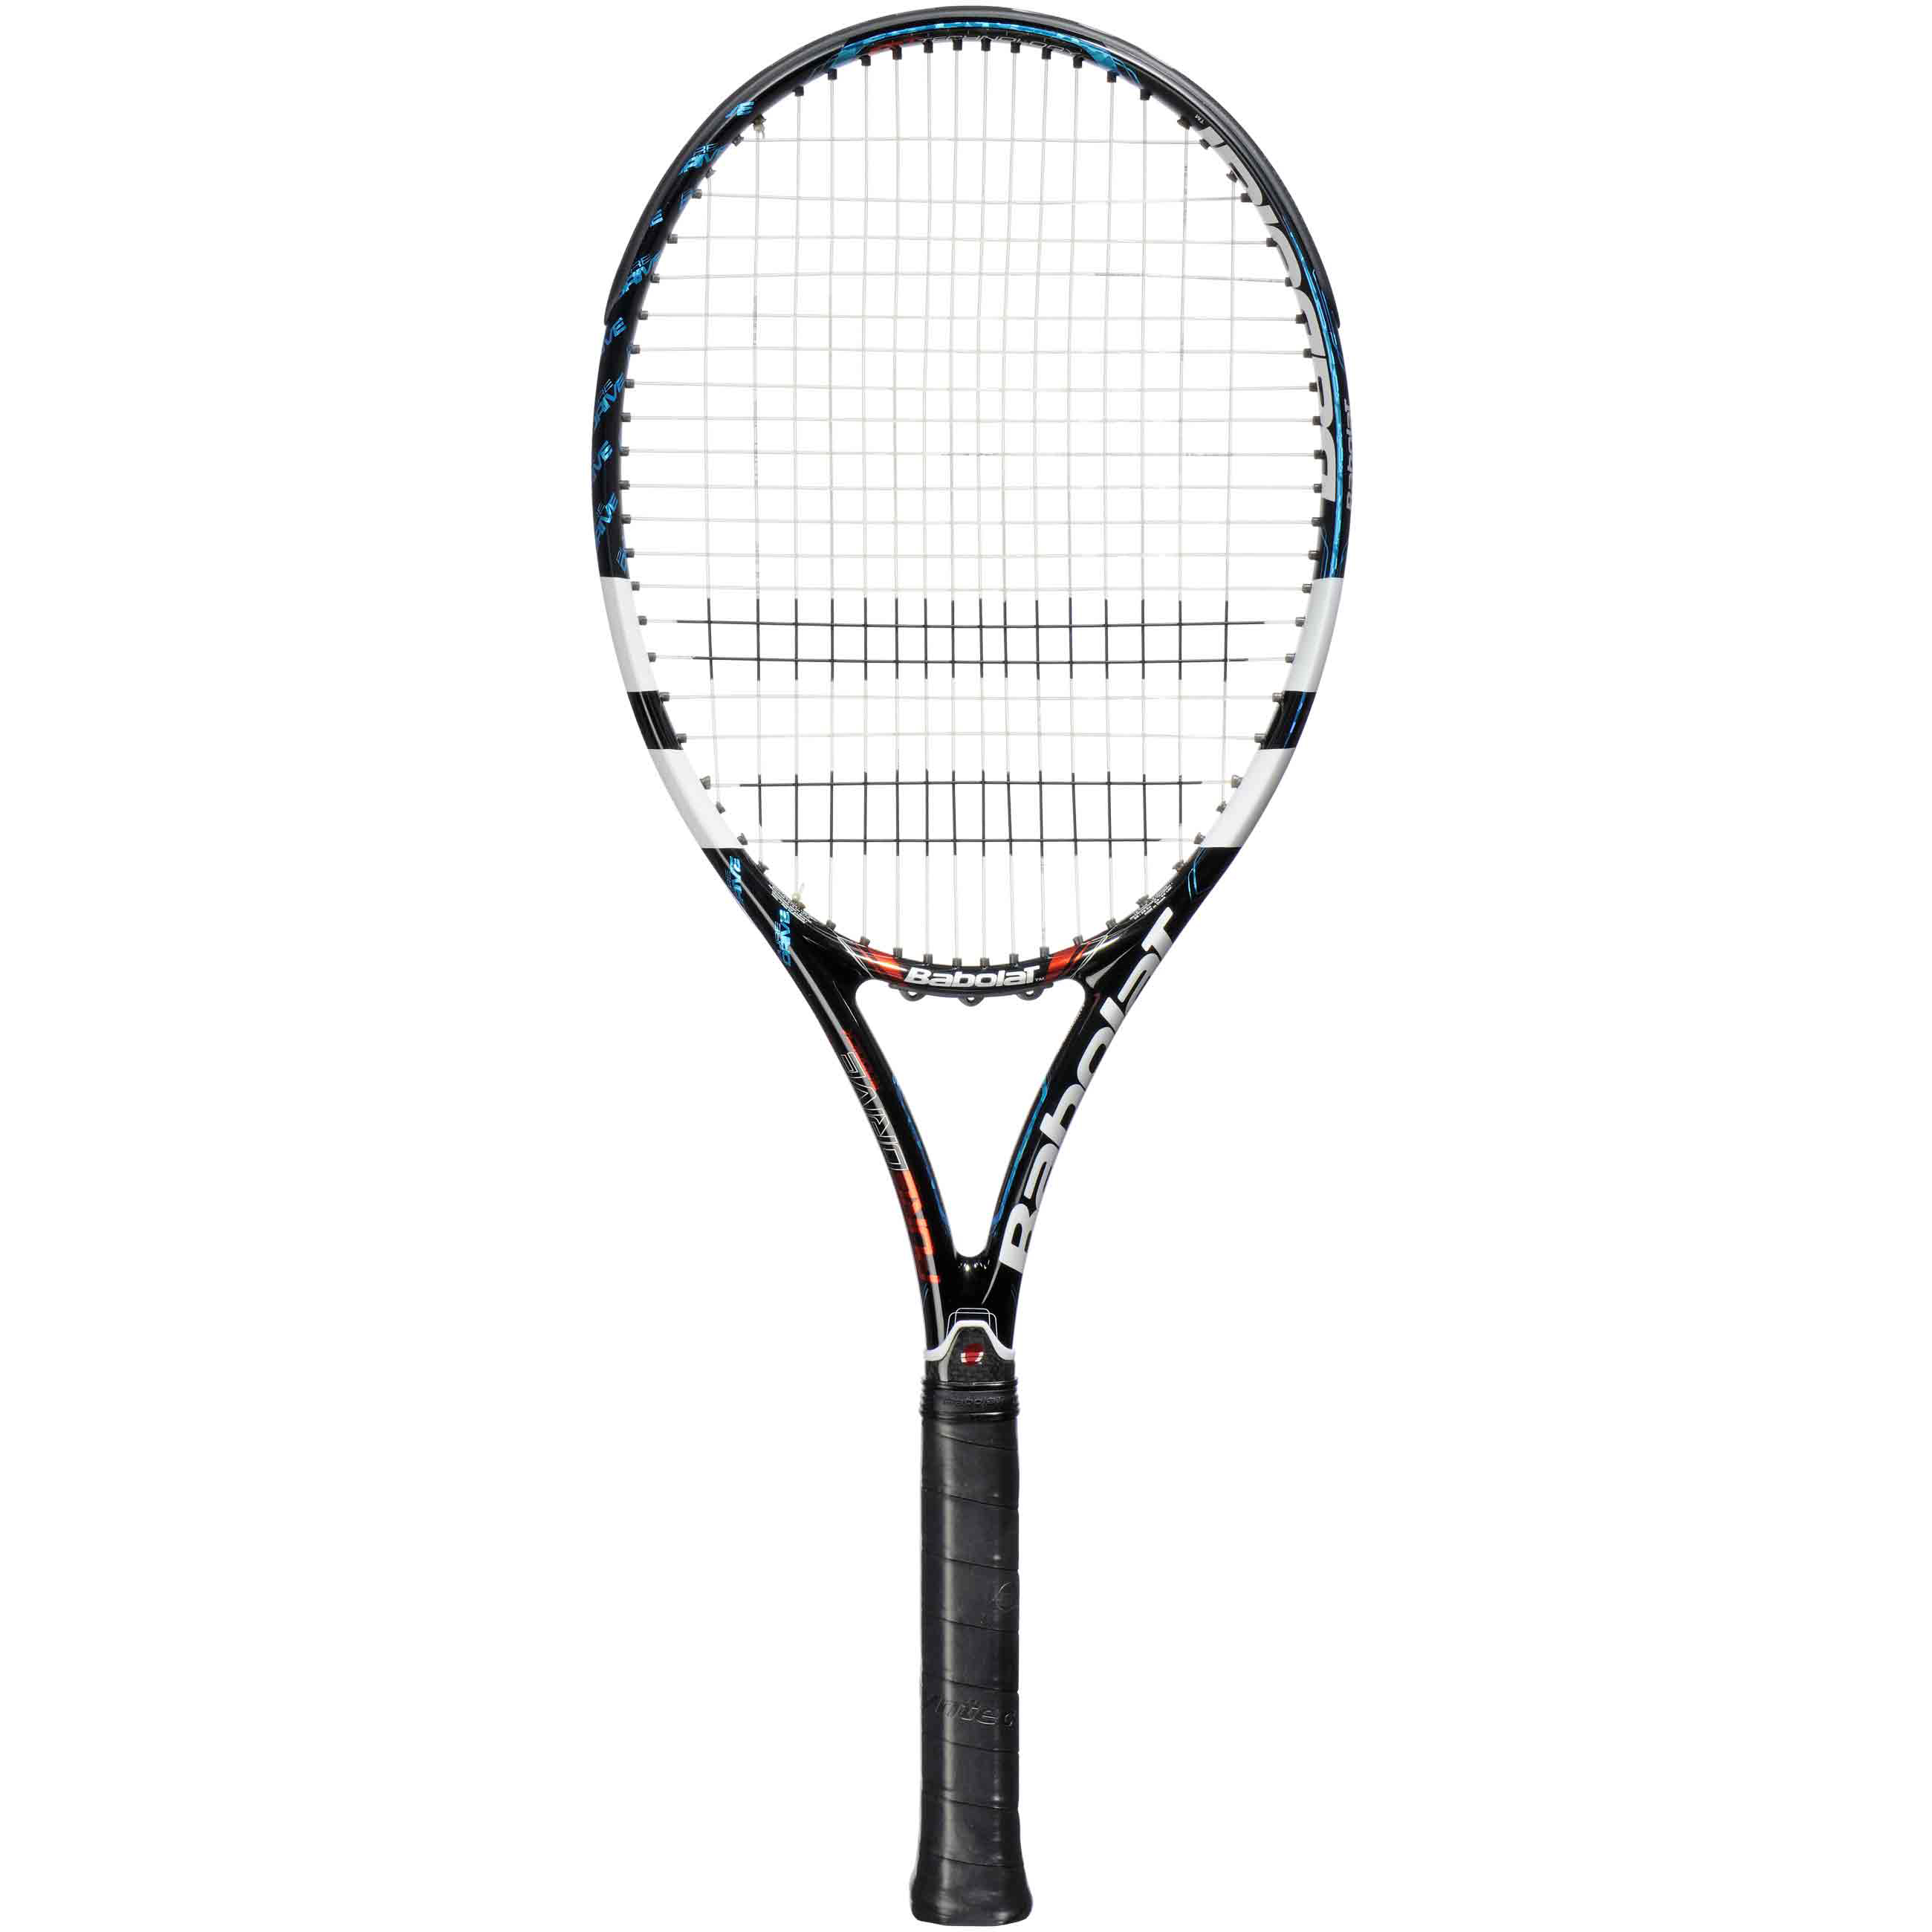 babolat tennis rackets, babolat tennis racket - - buy online at ...